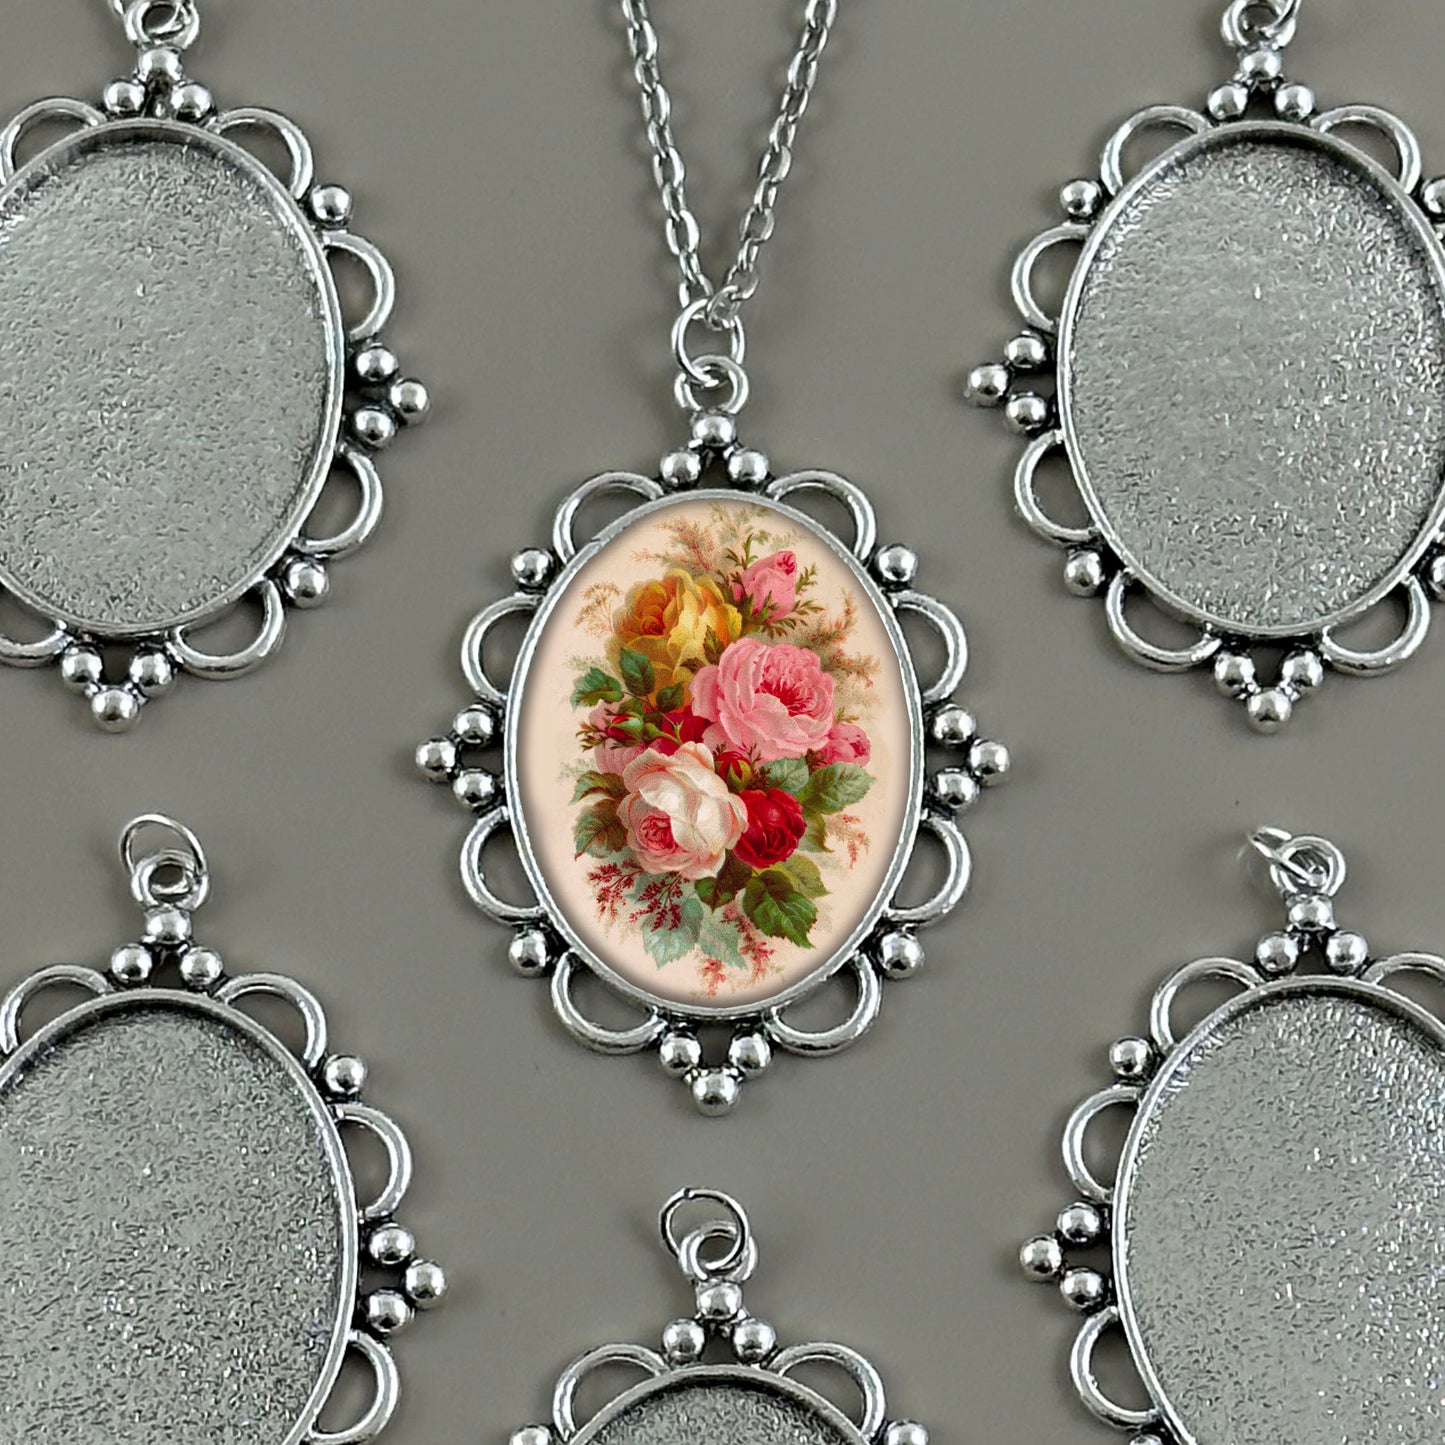 Mega Kit Photo Necklaces with 40x30mm Antique Silver Beaded Flower Oval Photo Pendants